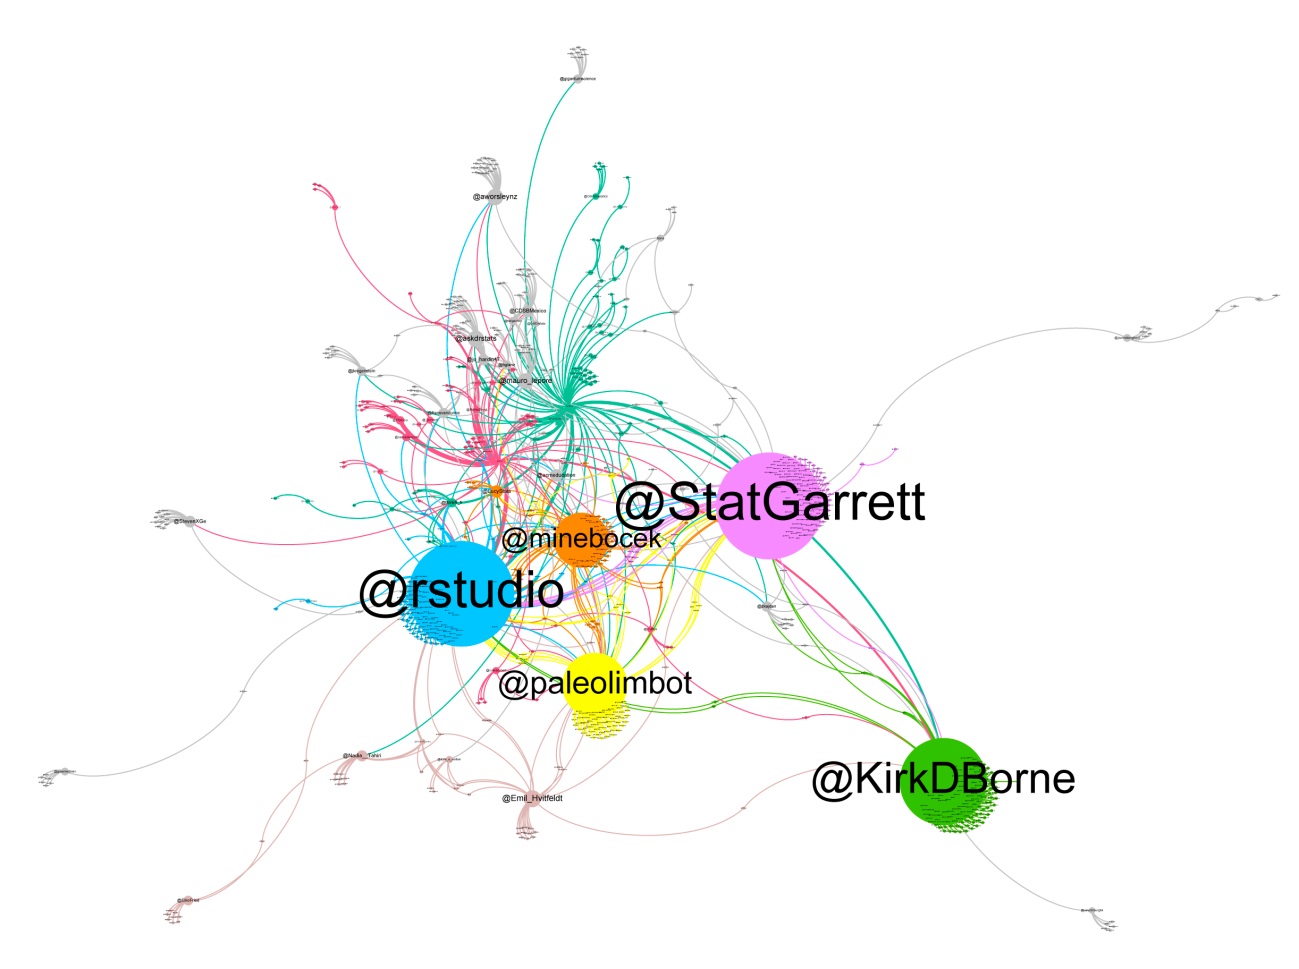 RTs map of the tweets related to Rstudio